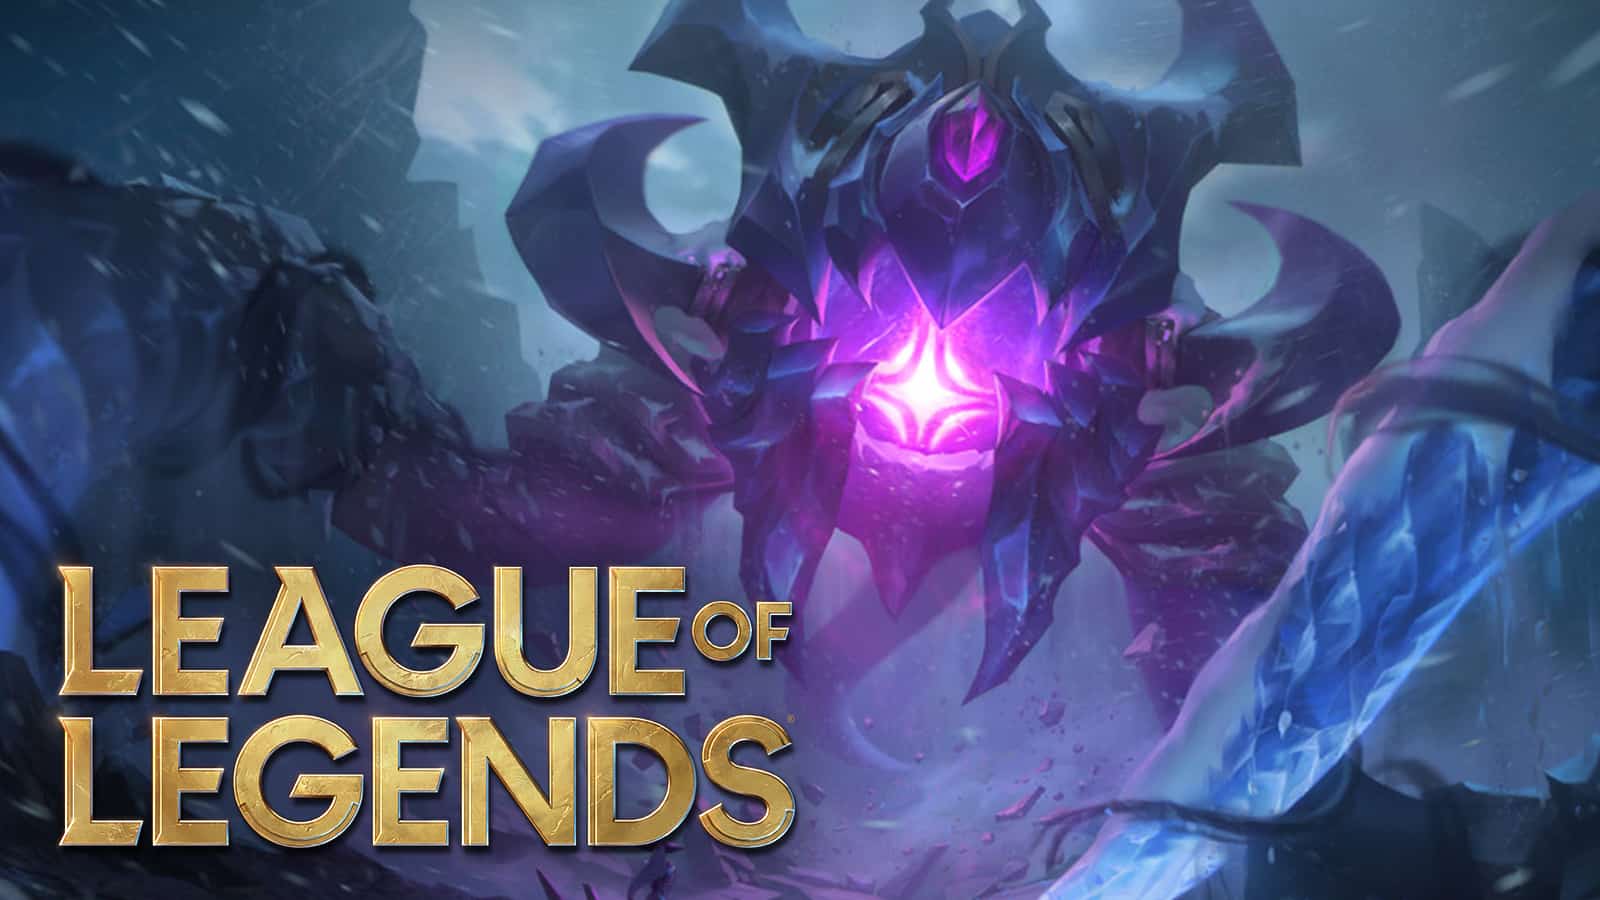 League of Legends champion visual updates could take 20 years